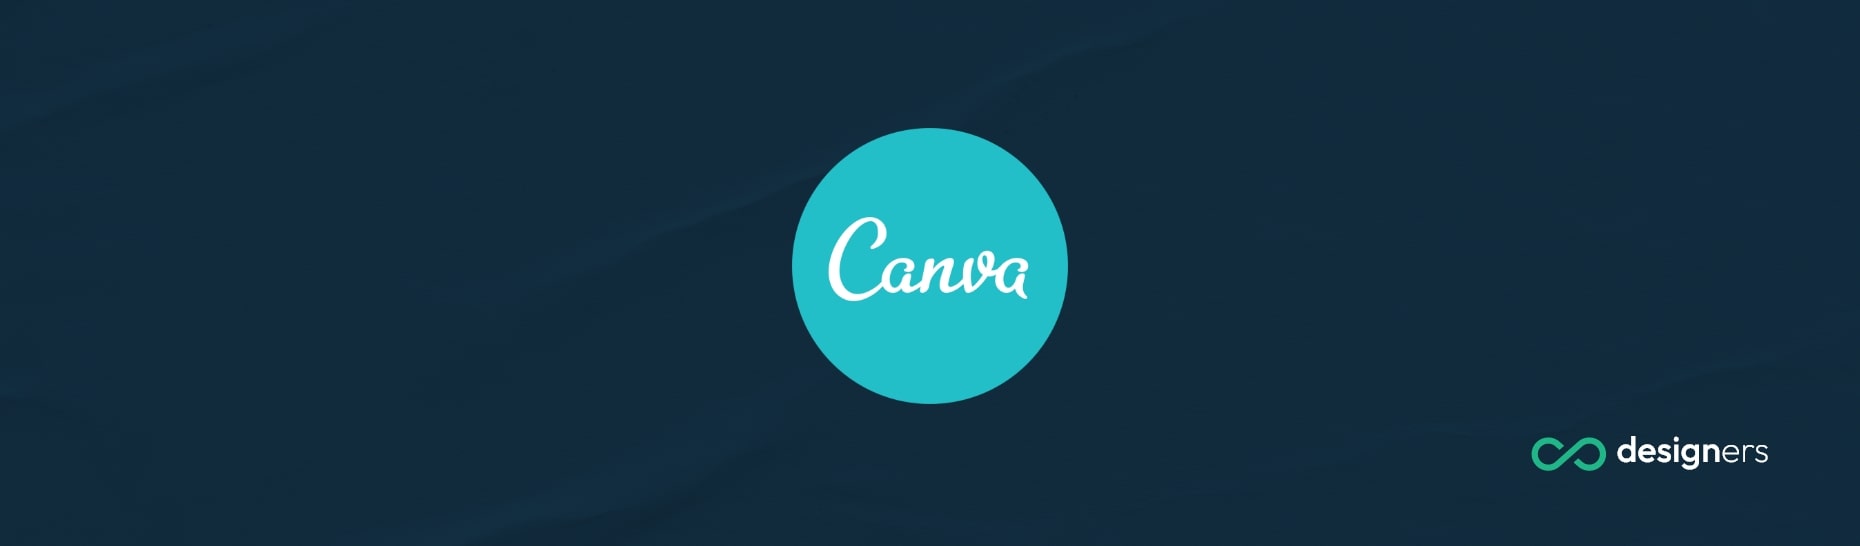 Does Canva Have a Download Limit?